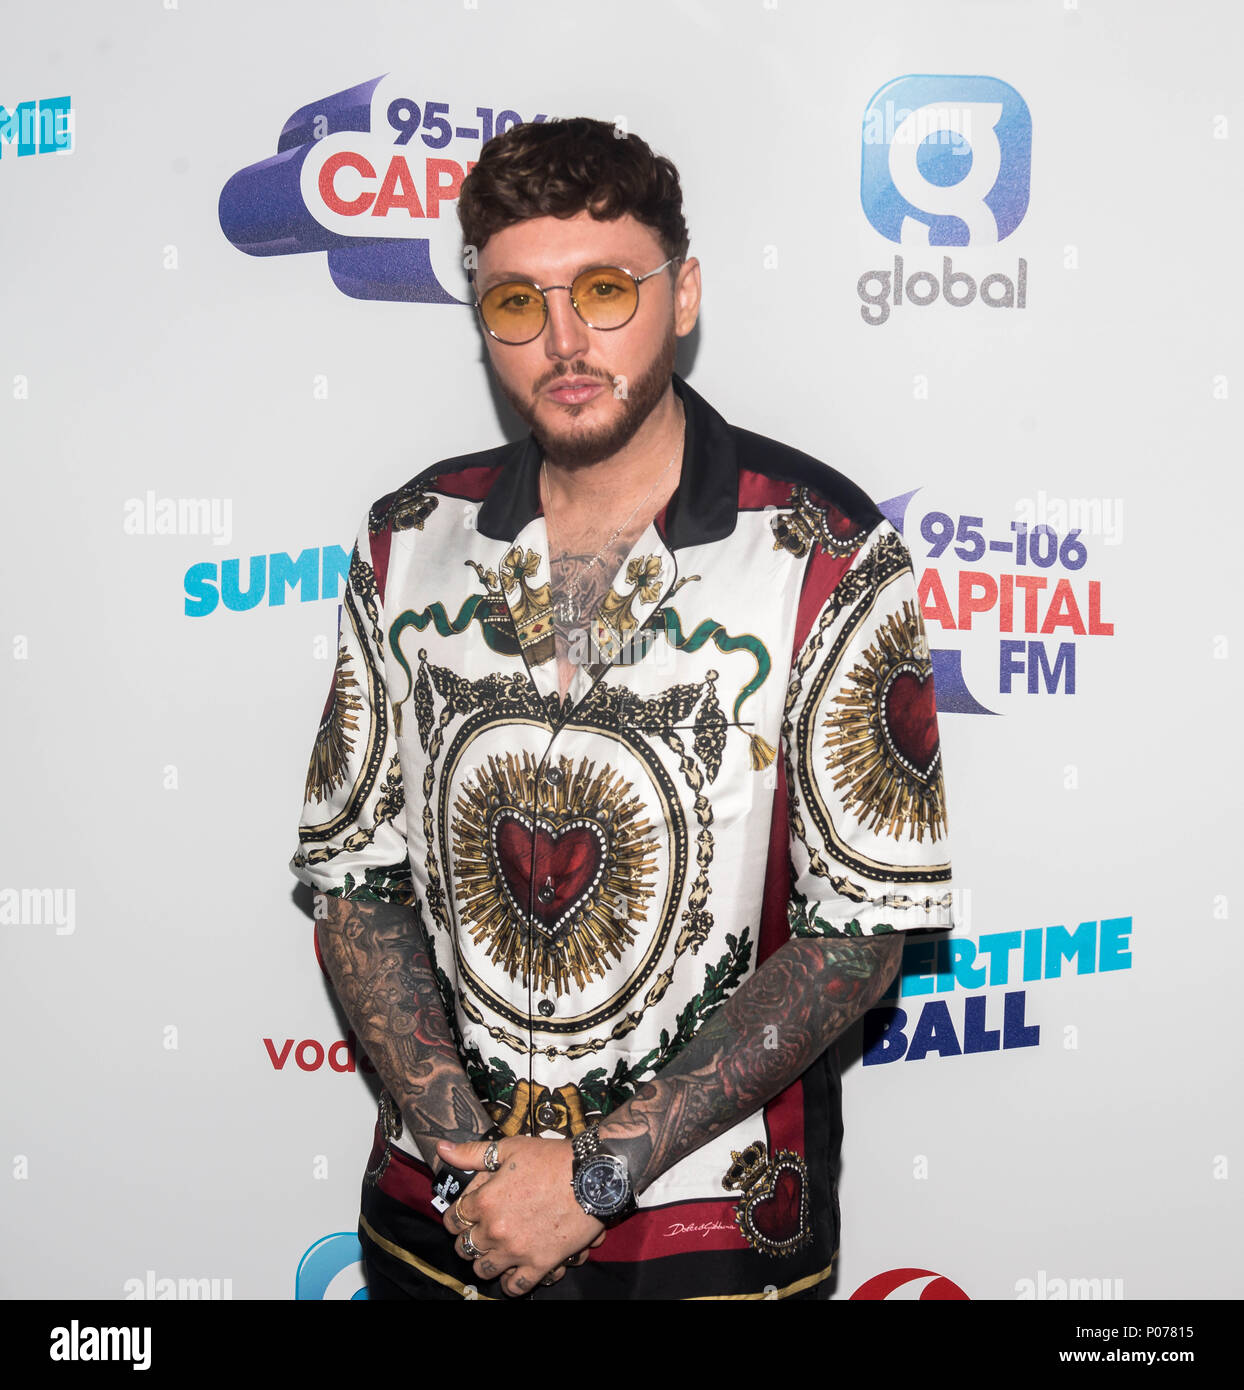 Wembley, United Kingdom. 9th June 2018. James Arthur at Capital's  Summertime Ball with Vodafone at London's Wembley Stadium. The sell-out  event saw performances from this summer's hottest artists Camila Cabello,  Shawn Mendes,